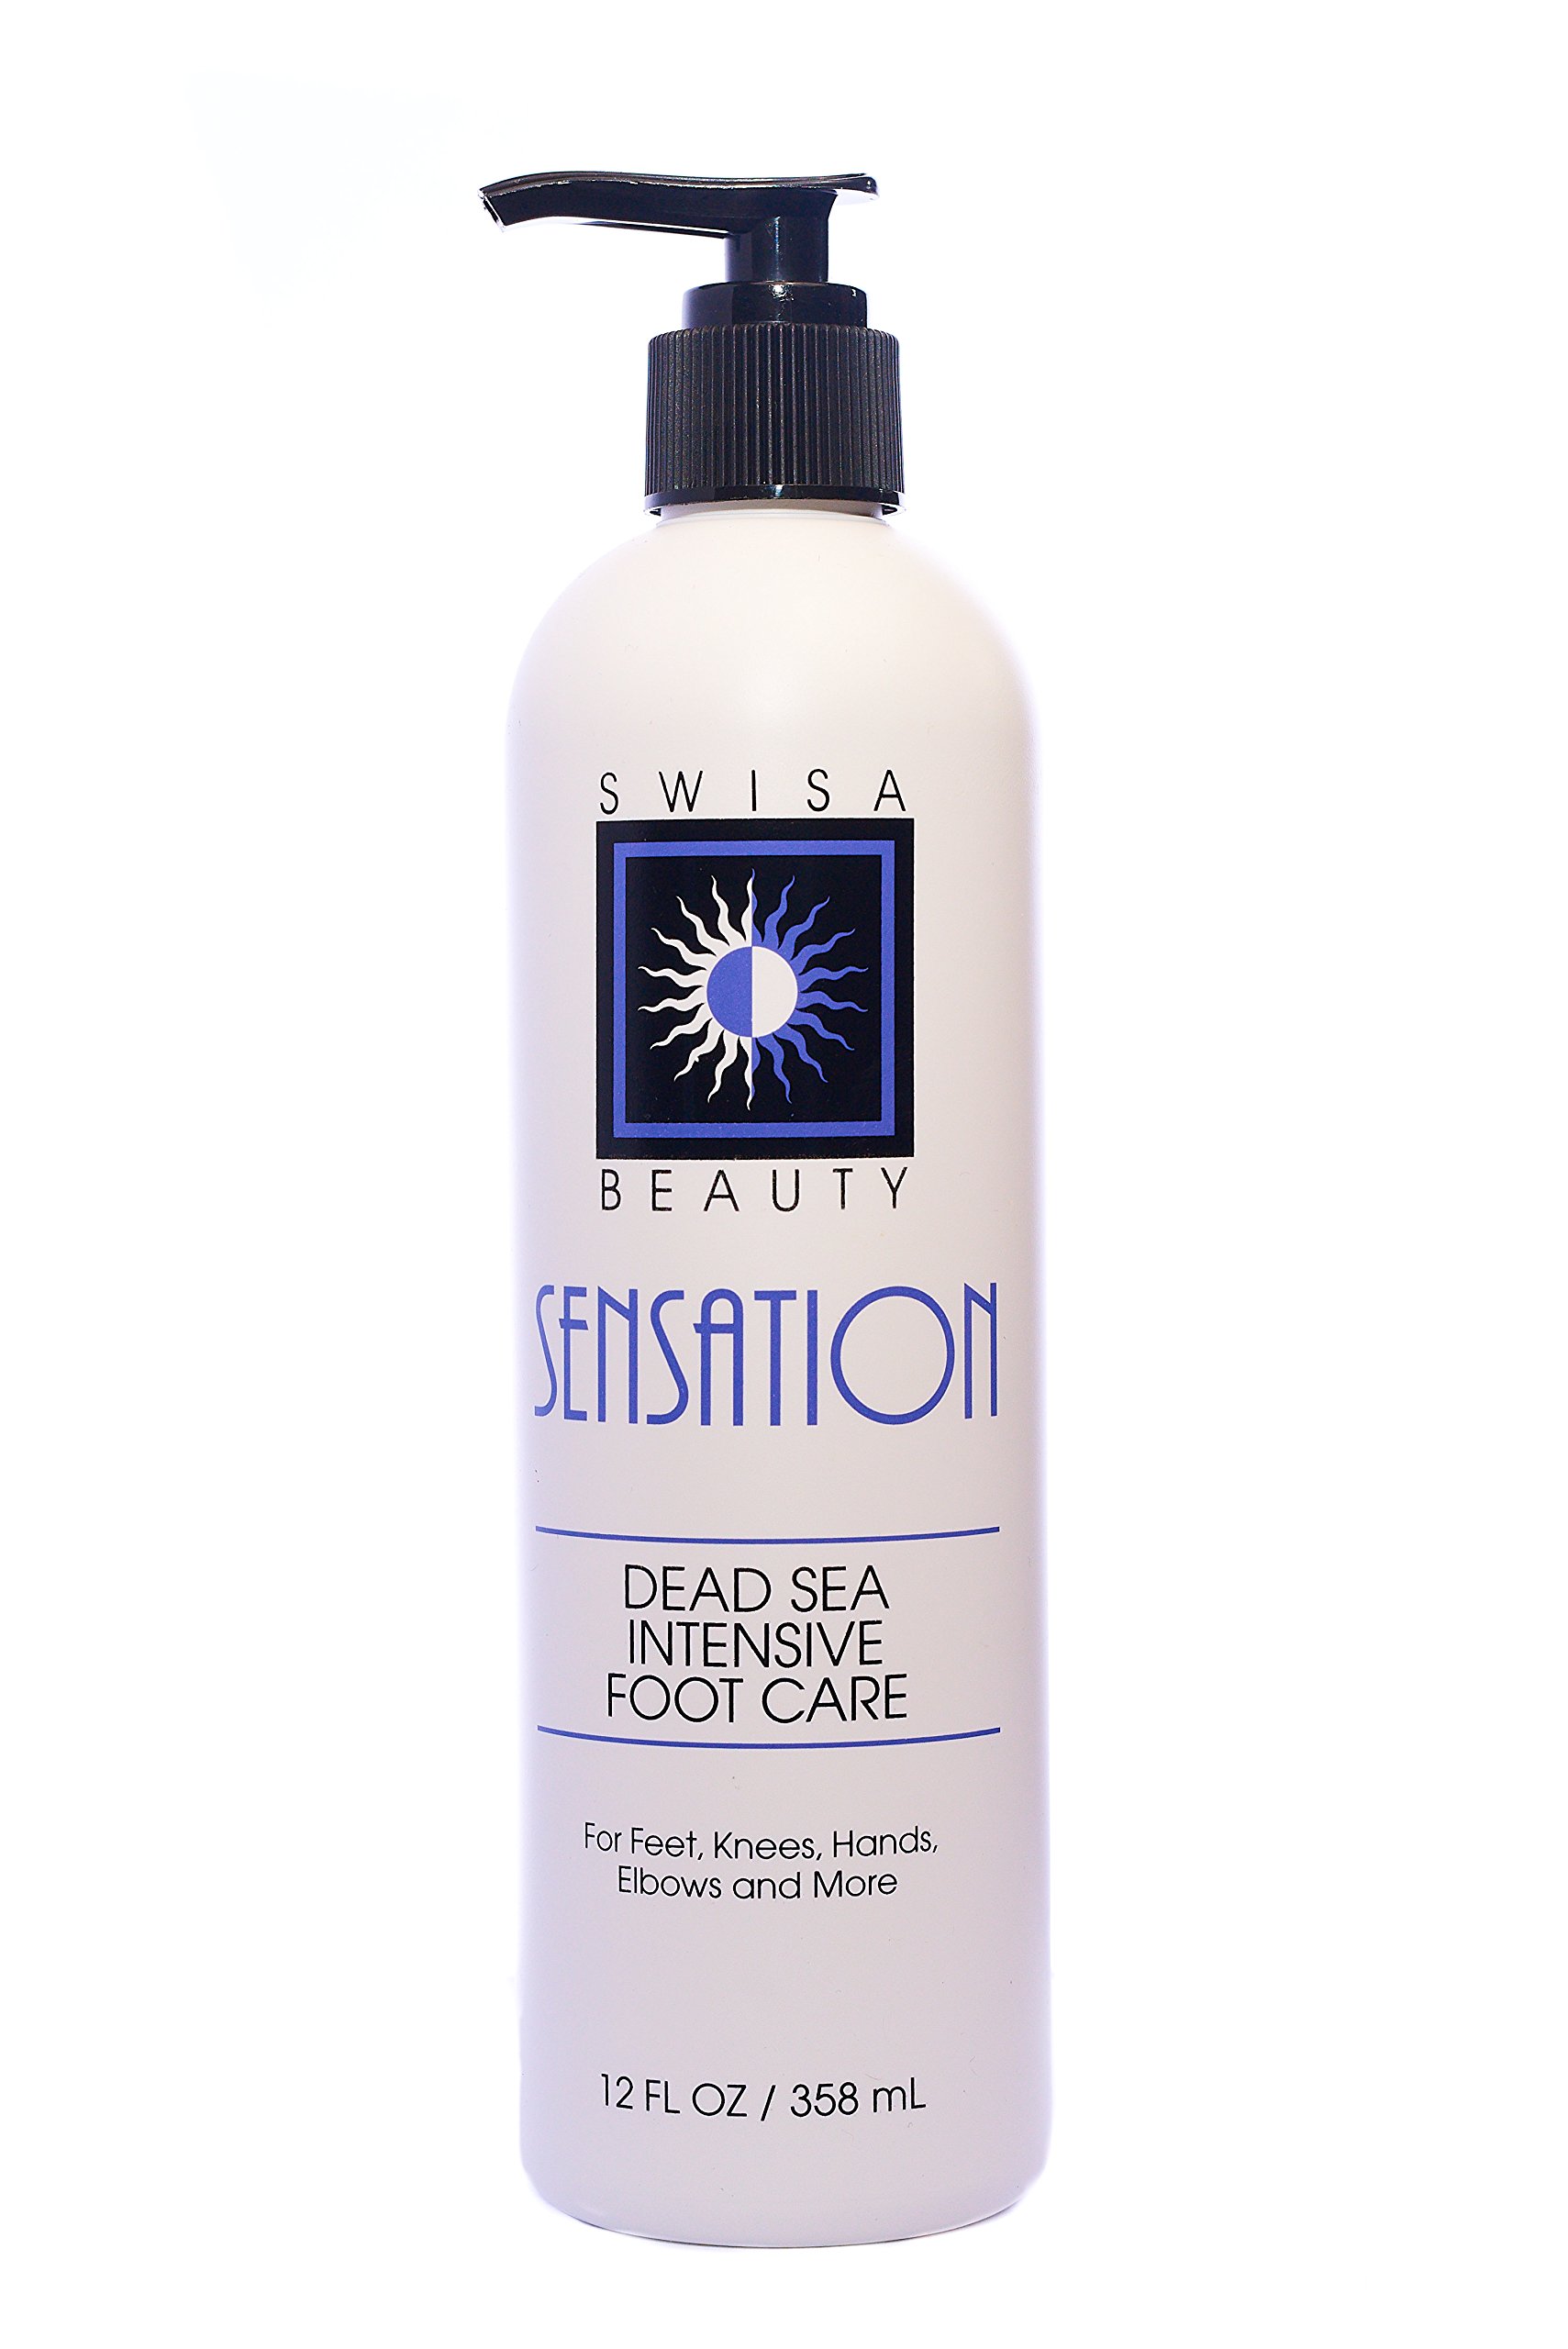 Swisa Beauty Dead Sea Intensive Foot Care Lotion - Contains Aloe Vera As The Base and Eucalyptus Oil For Deep Penetration